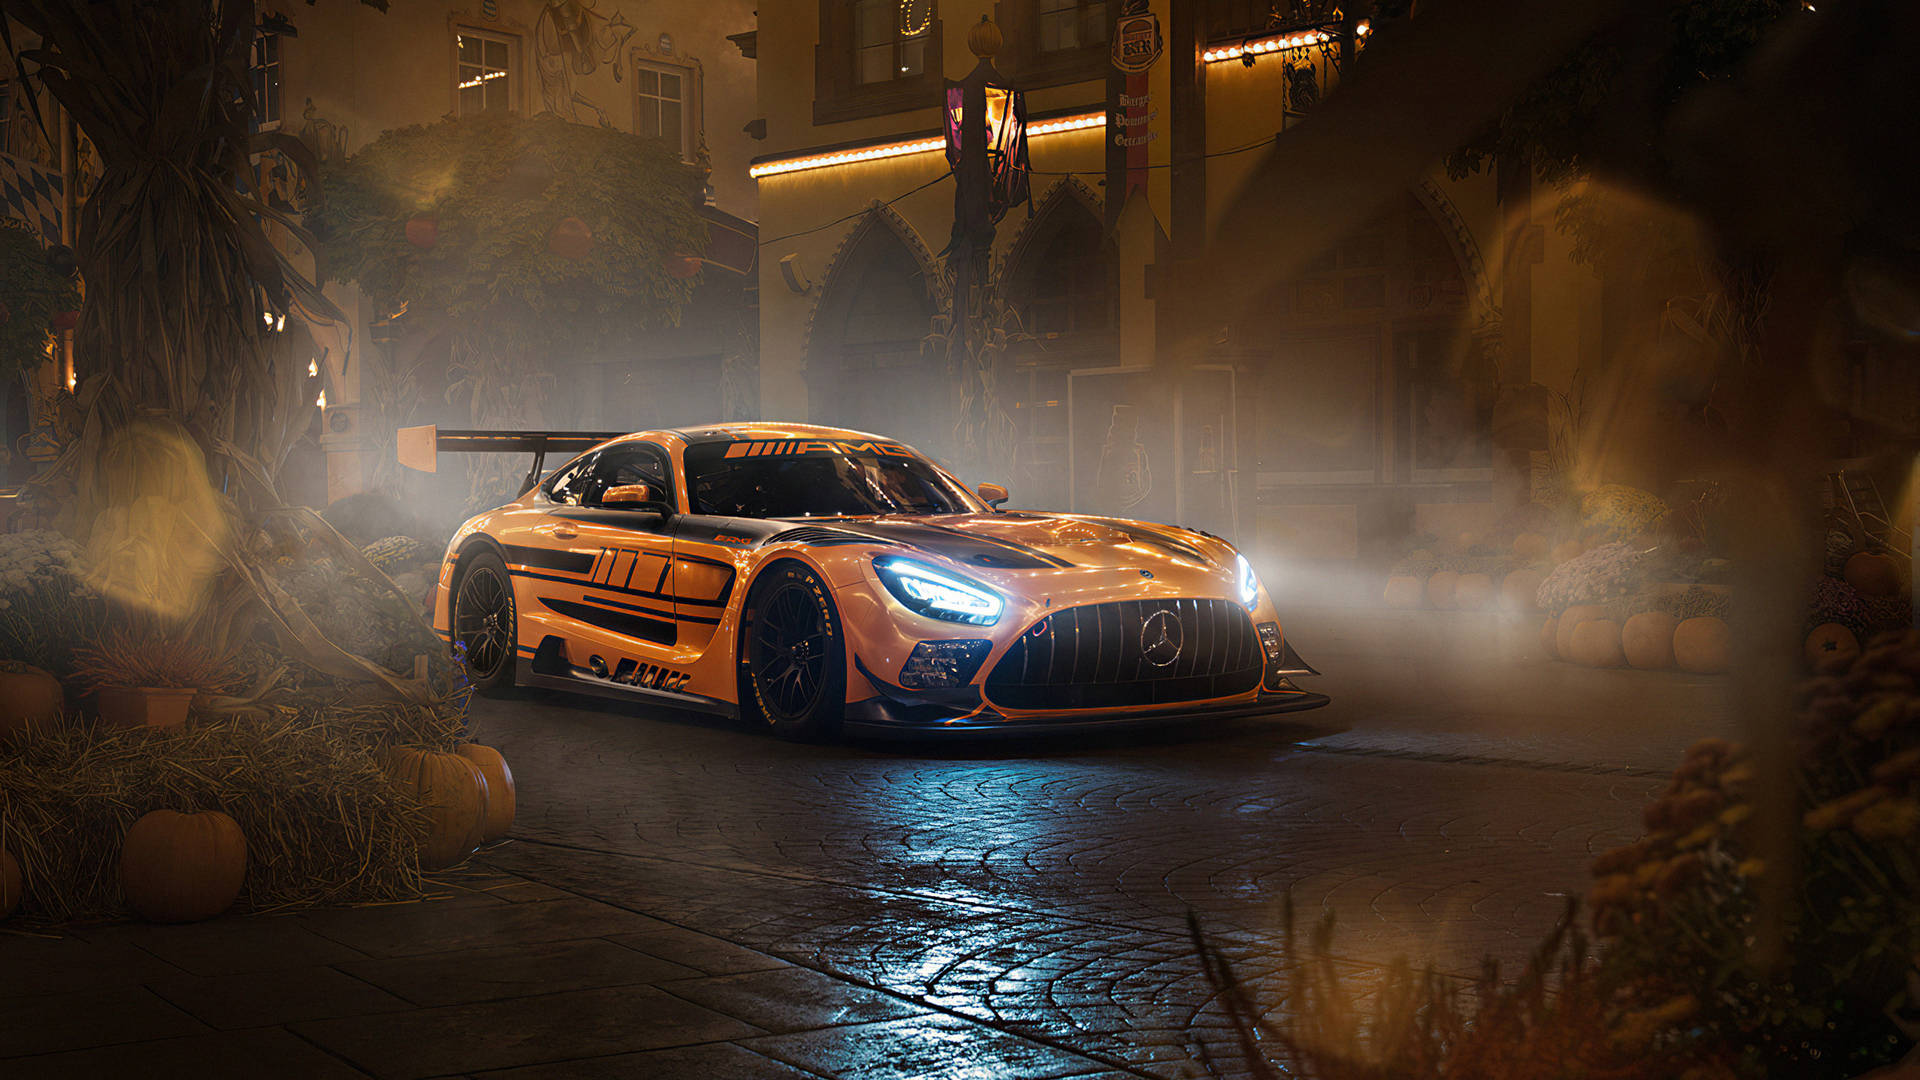 Amg Gtr Driving On Halloween Background